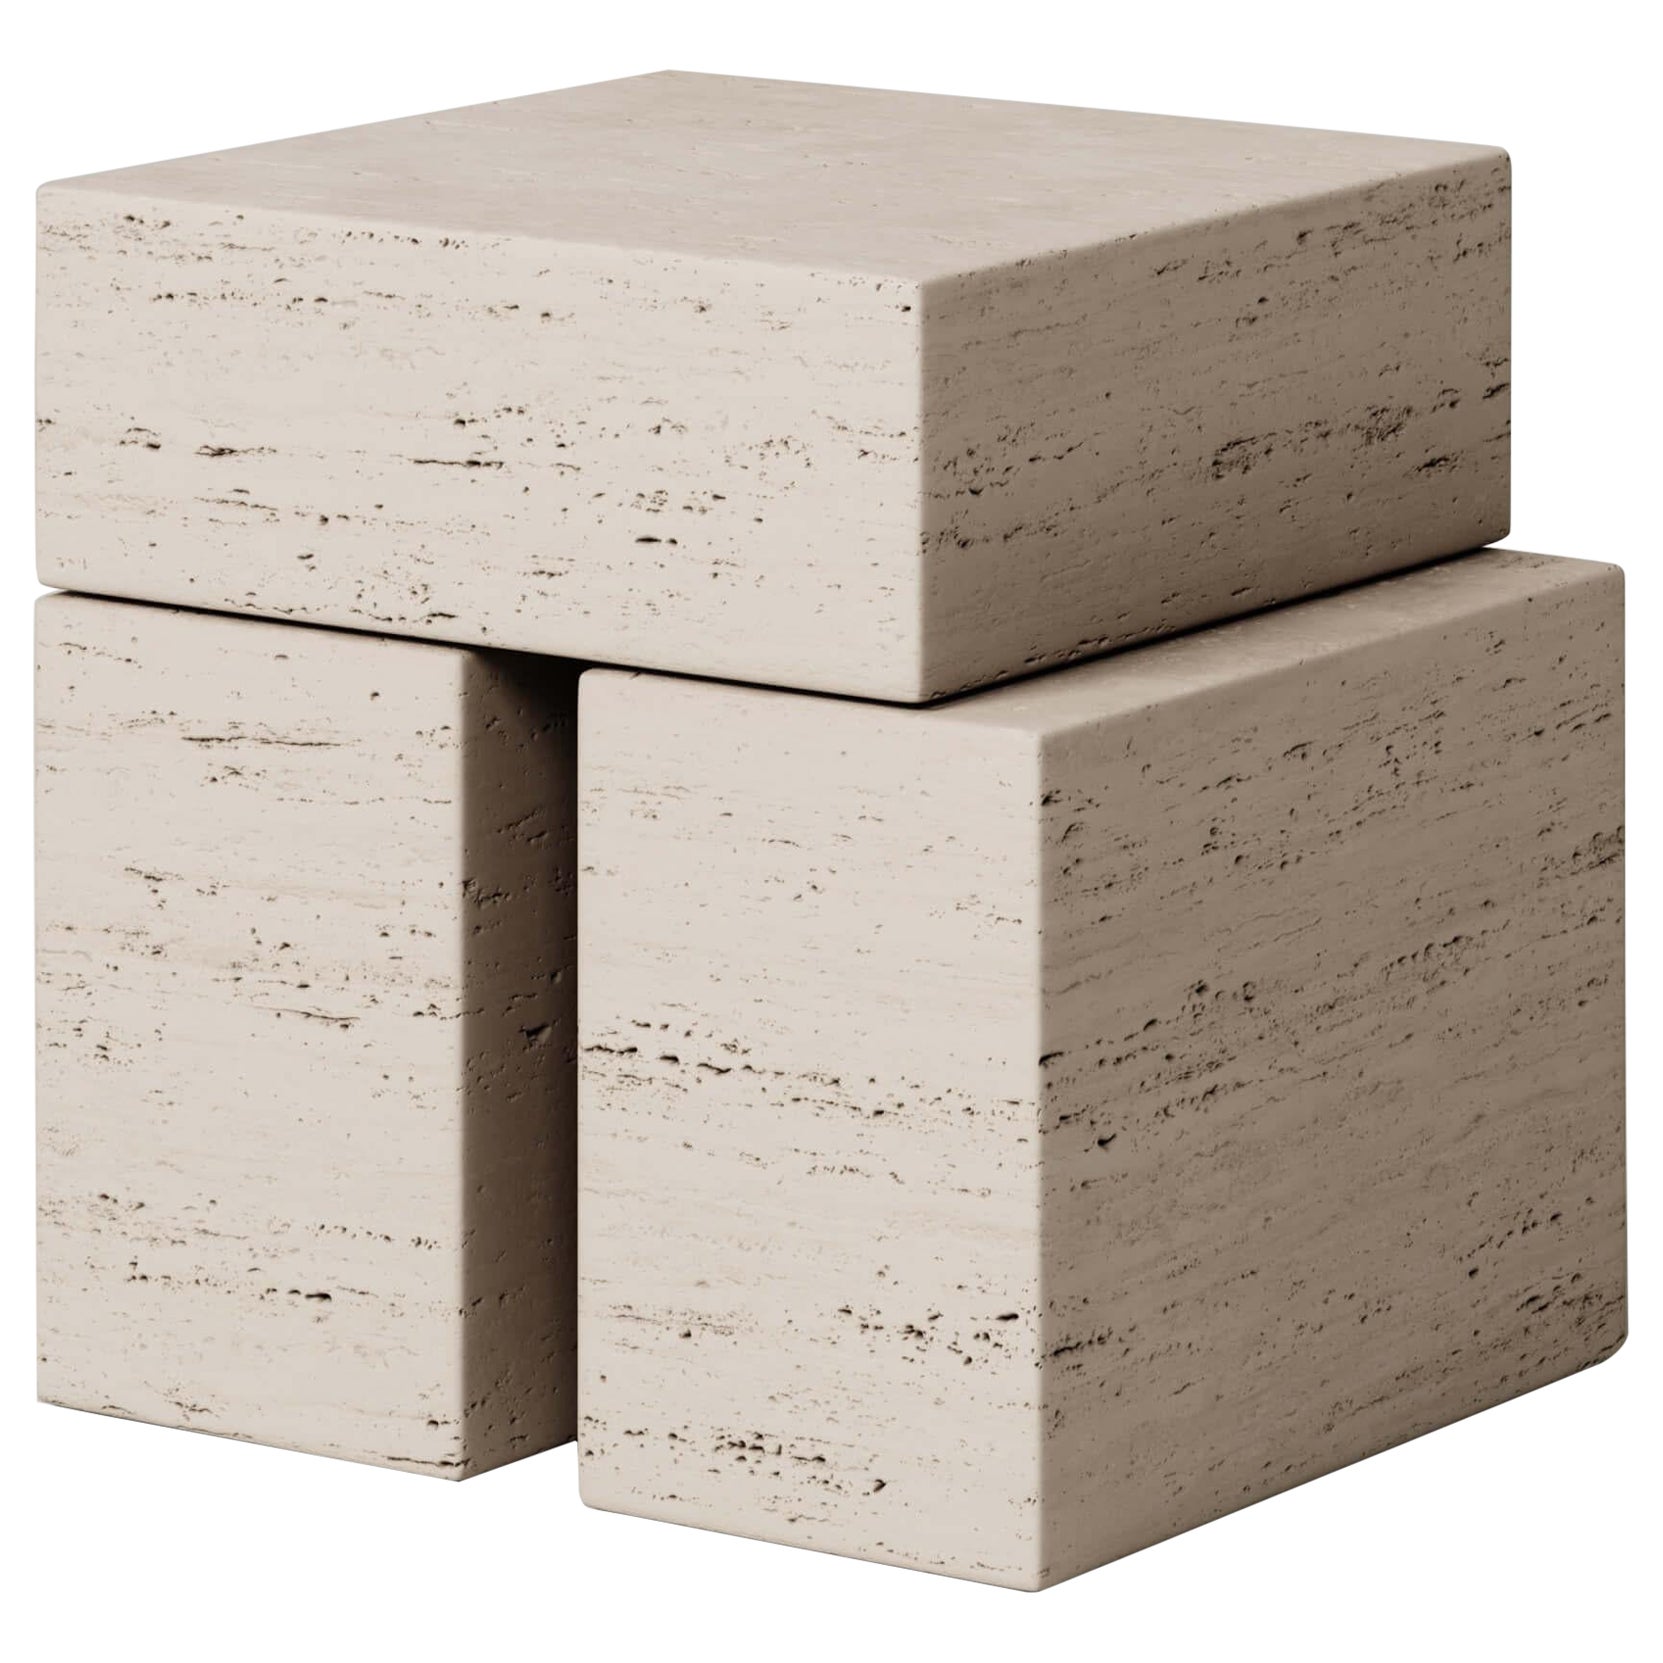 M_009 Side Table / Travertine by Monolith